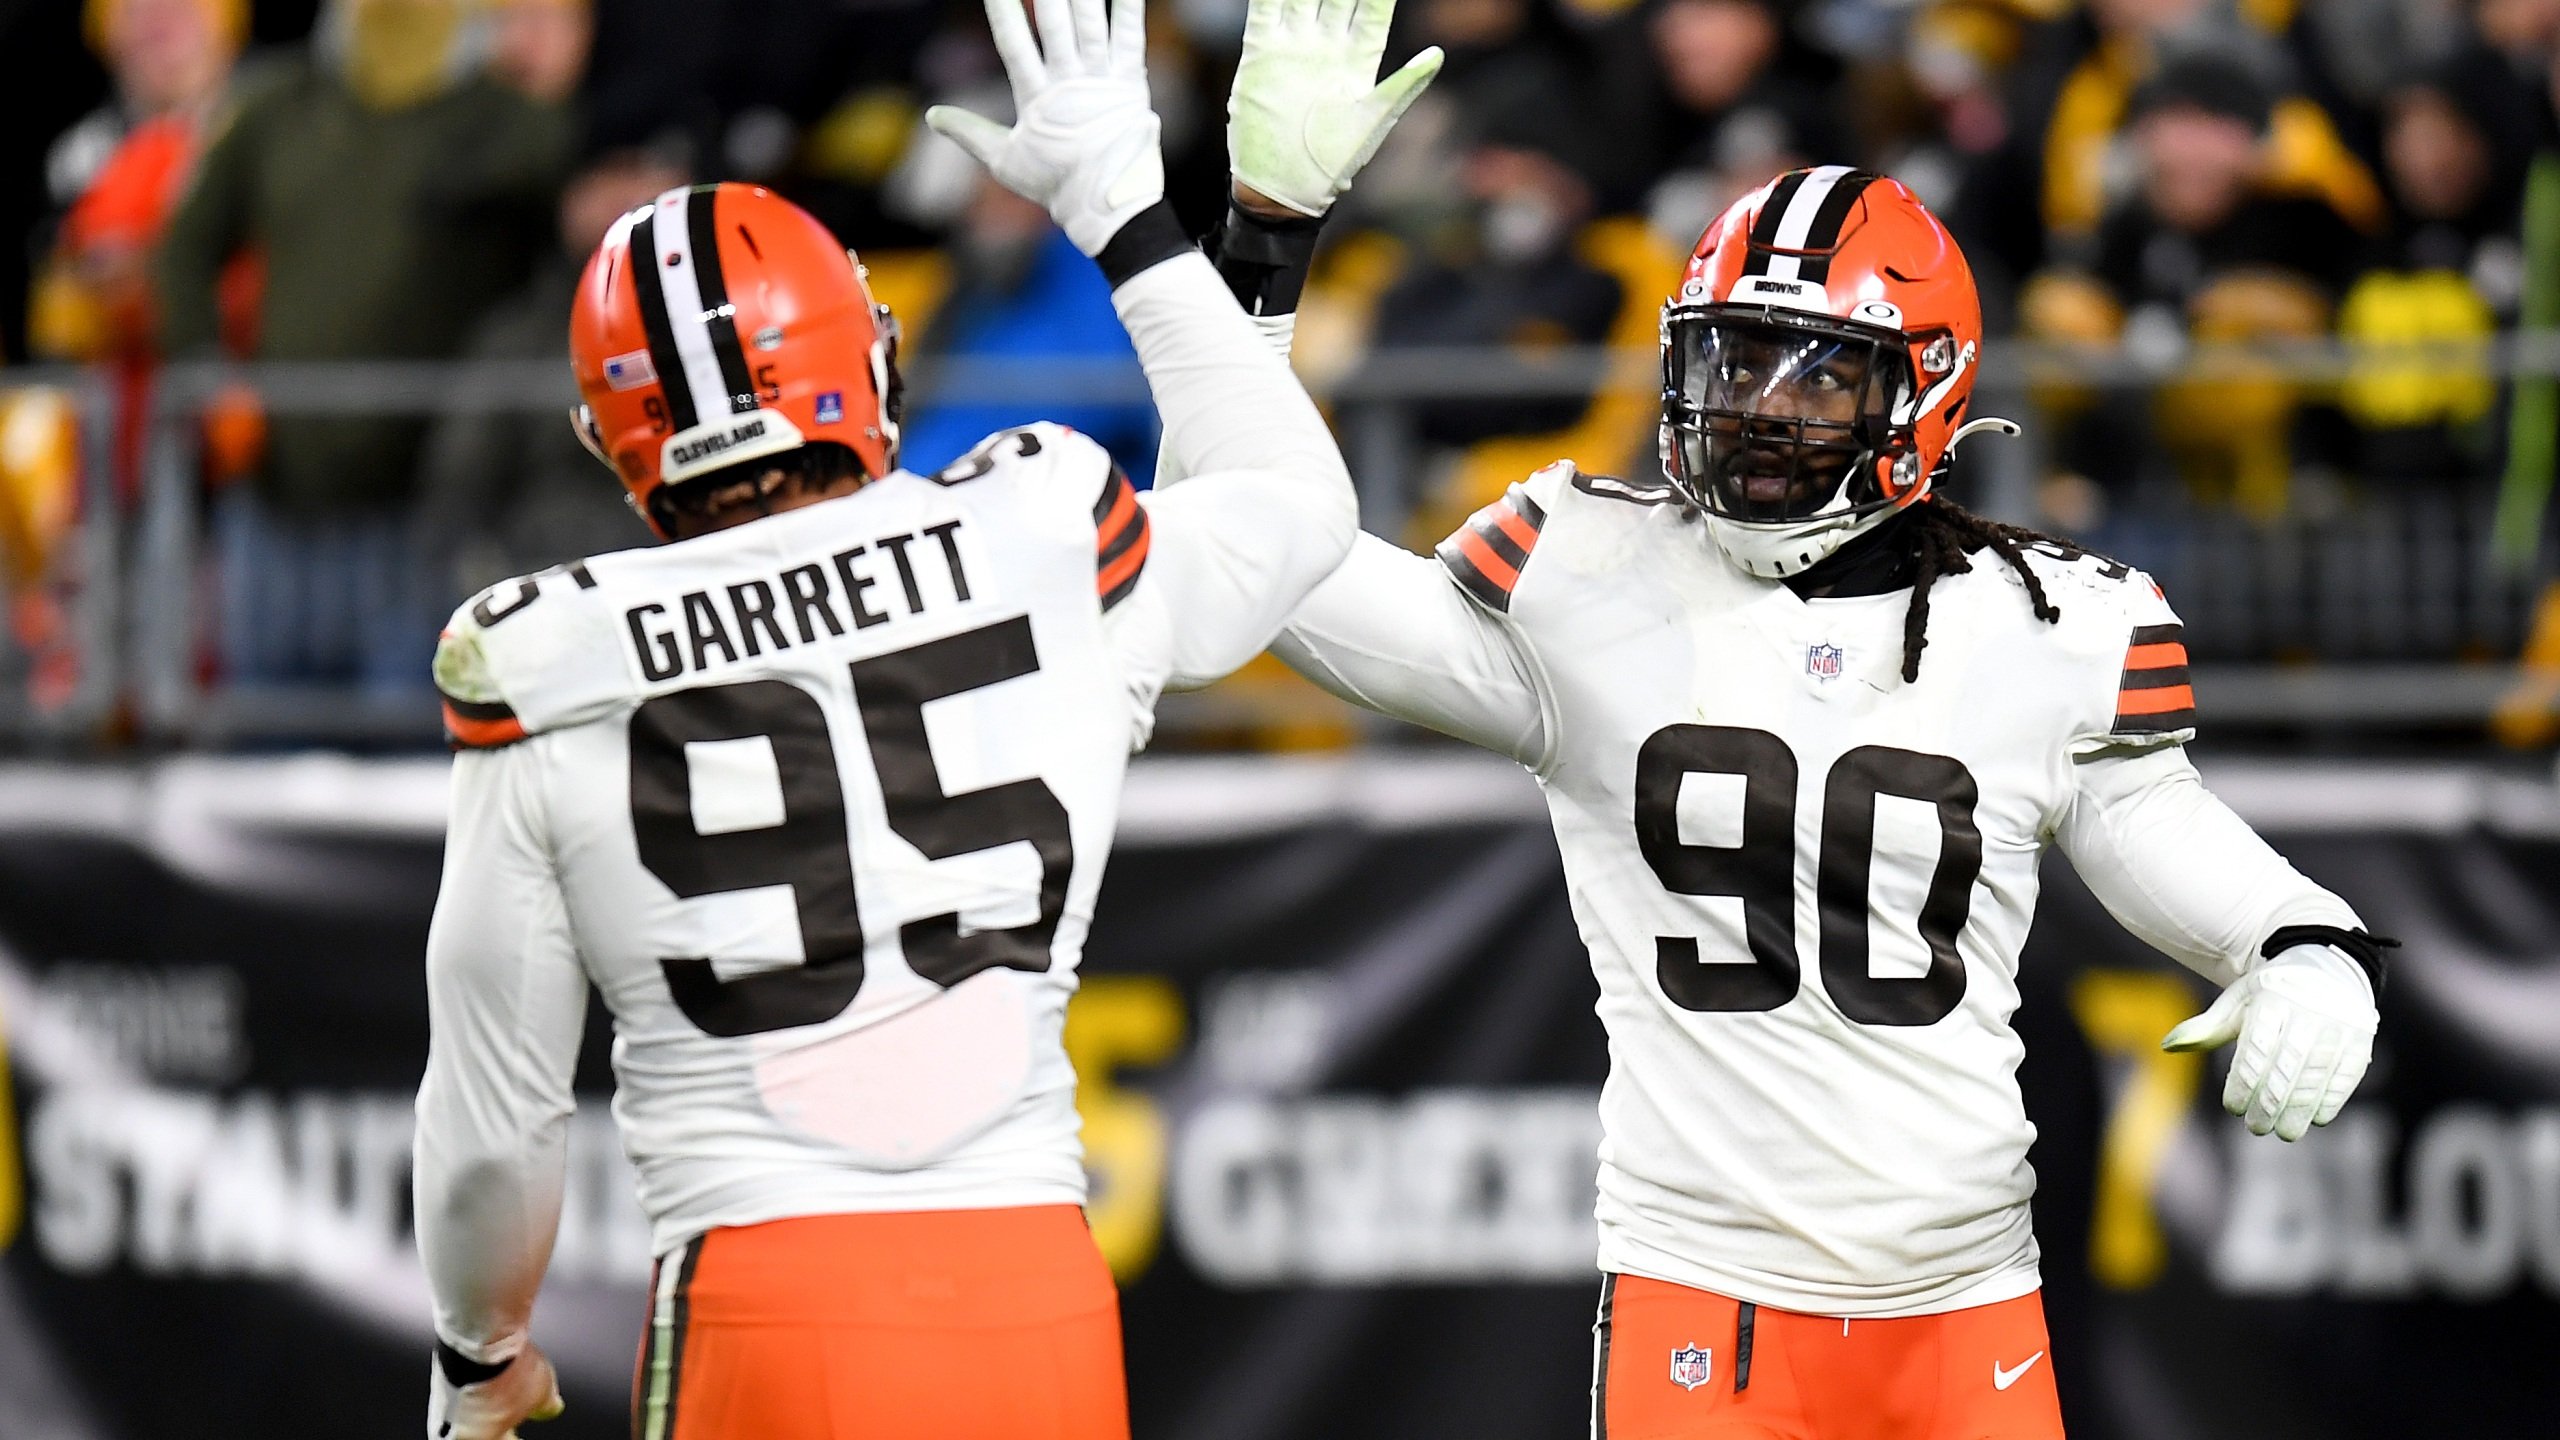 Browns players speak after season finale win against Bengals